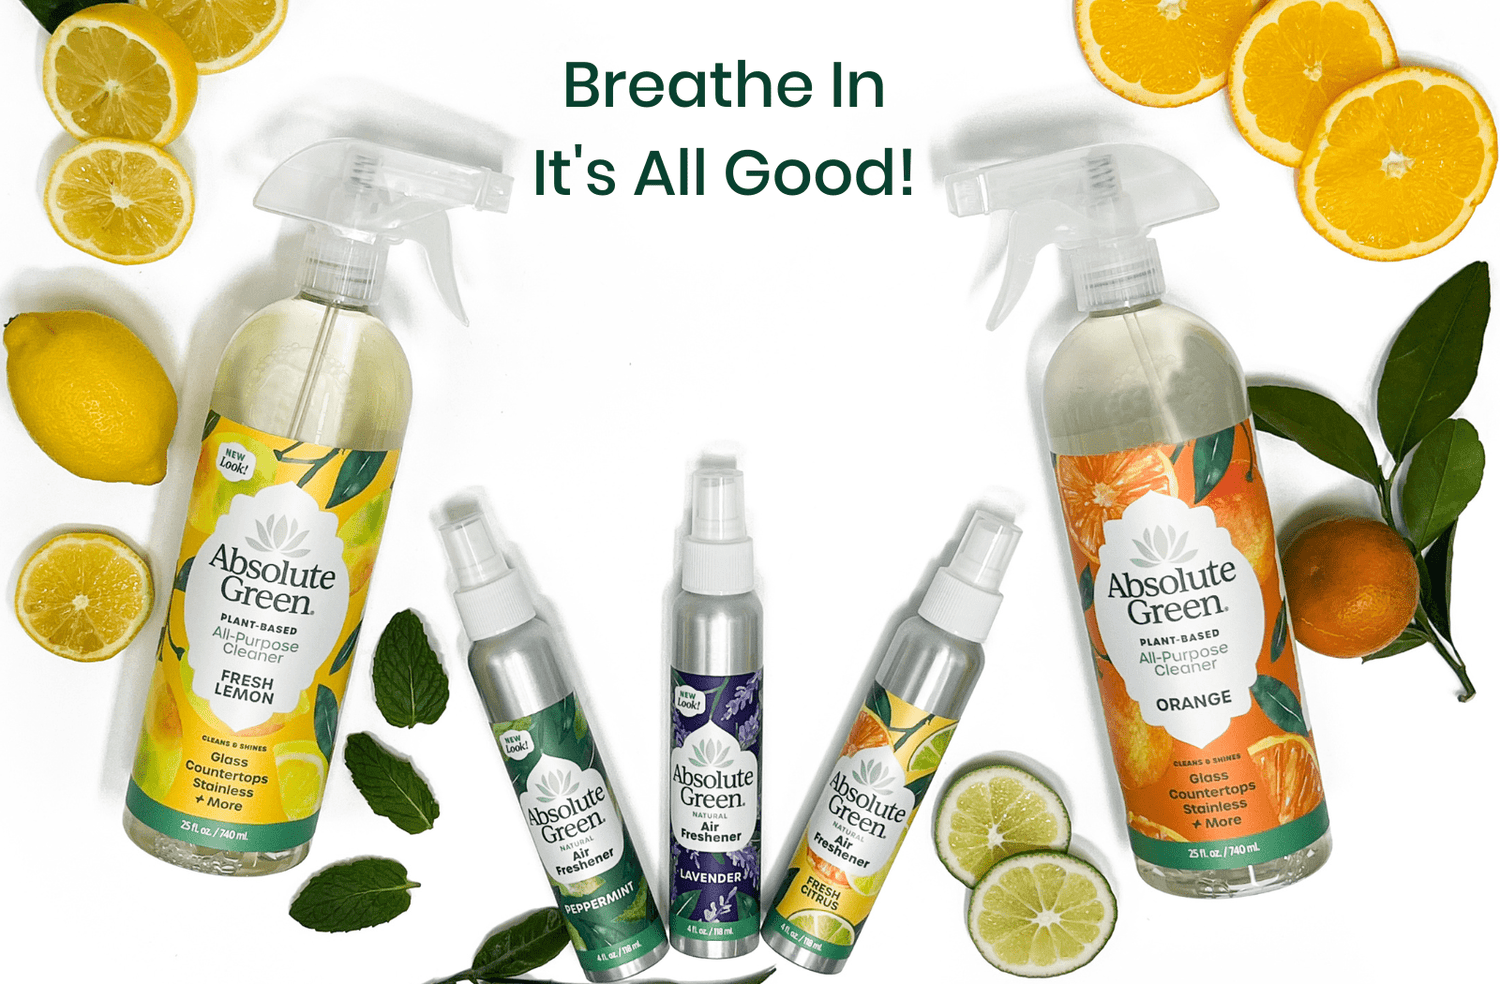 Absolute Green 100% Natural Air Fresheners, Cleaning Products, Wood Care and Lenin / Fabric Refreshers